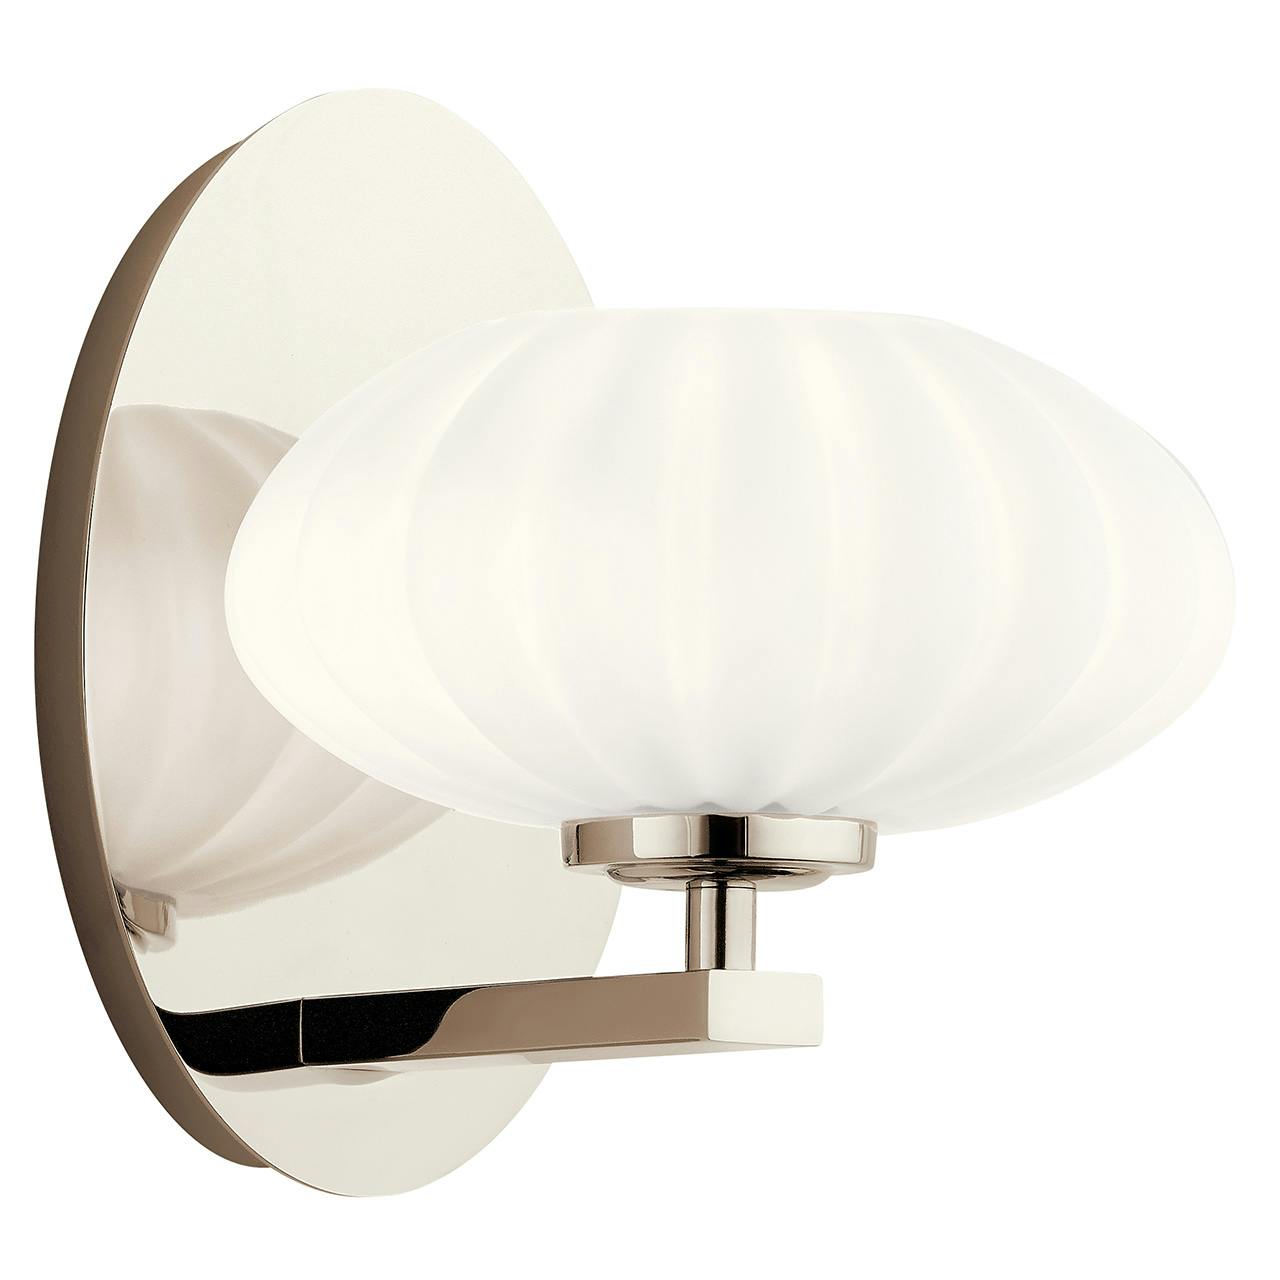 Pim 8" 1 Light Sconce in Polished Nickel on a white background